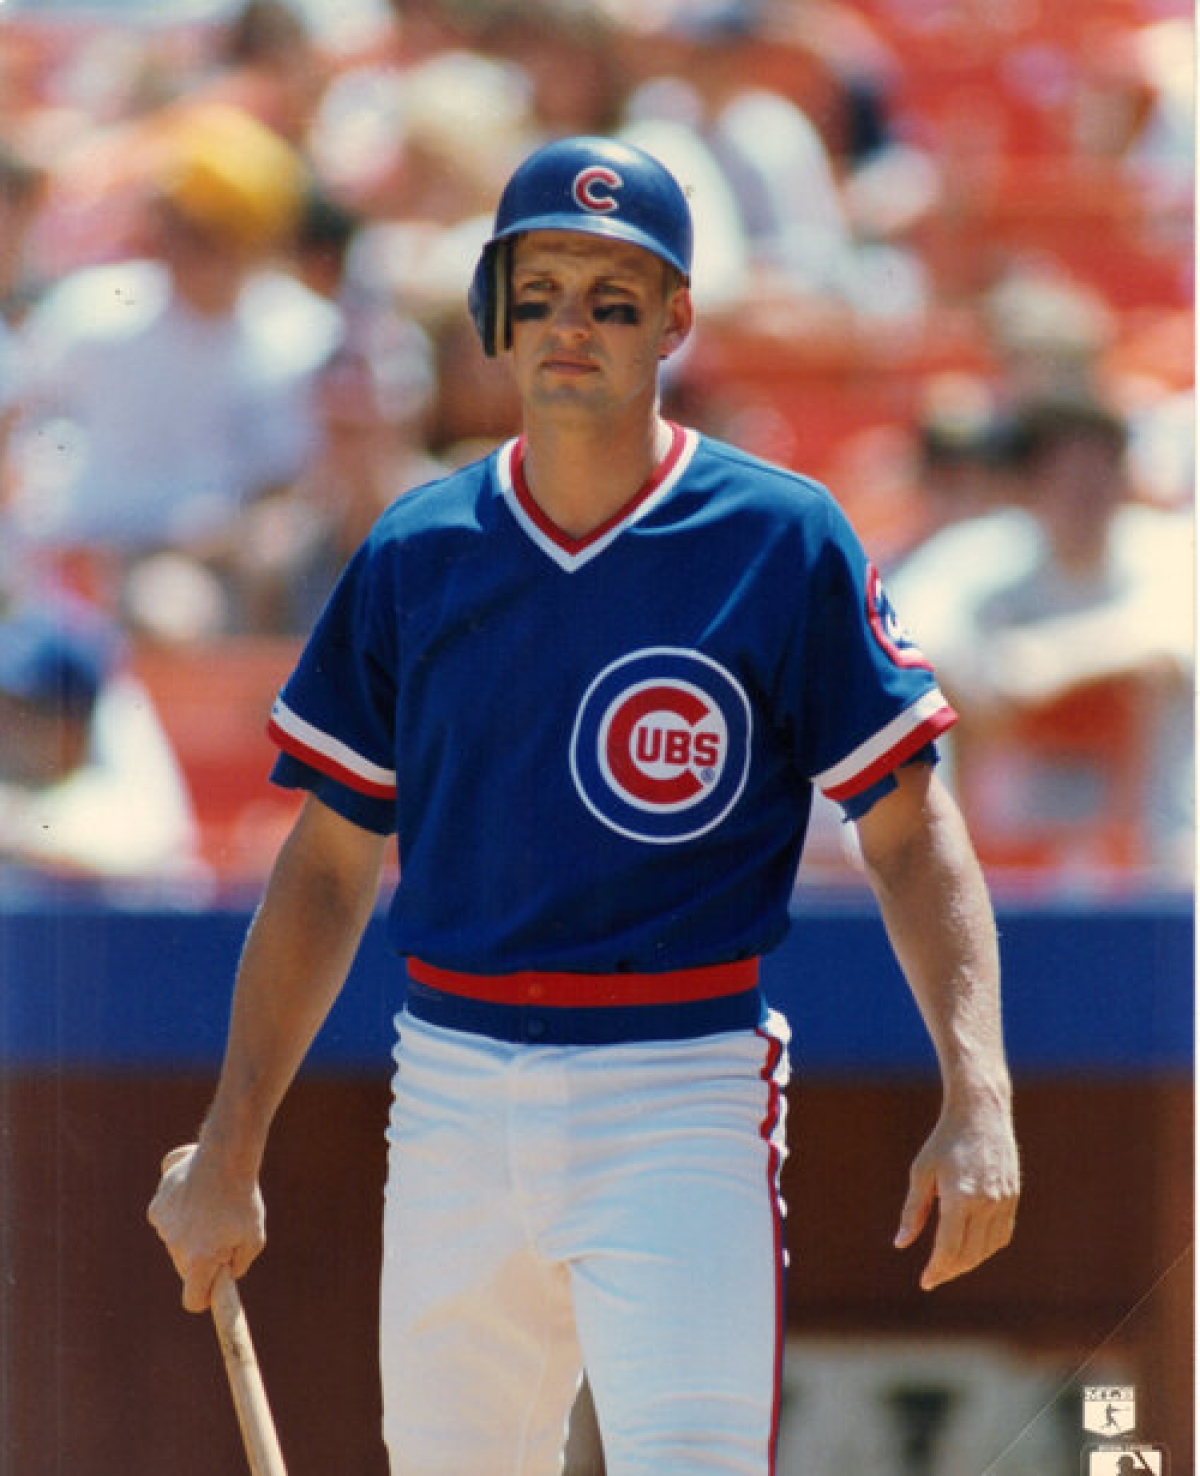 Not in Hall of Fame - 182. Mark Grace